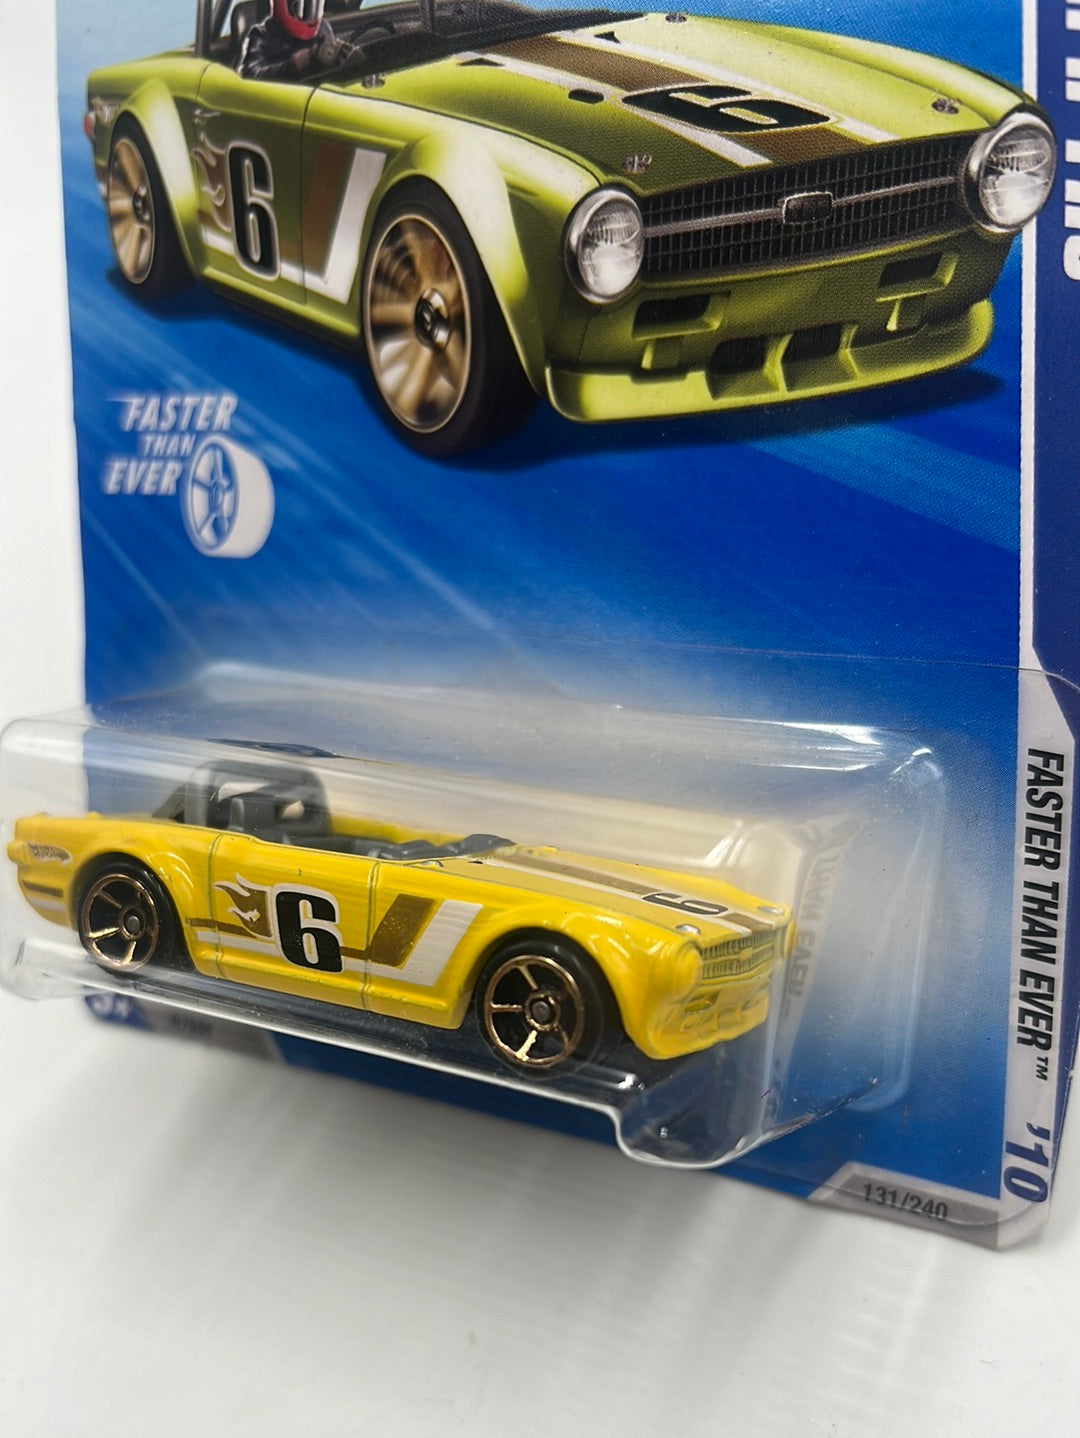 2010 Hot Wheels Faster Than Ever Triumph TR6 Kmart Exclusive Yellow 131/240 236C